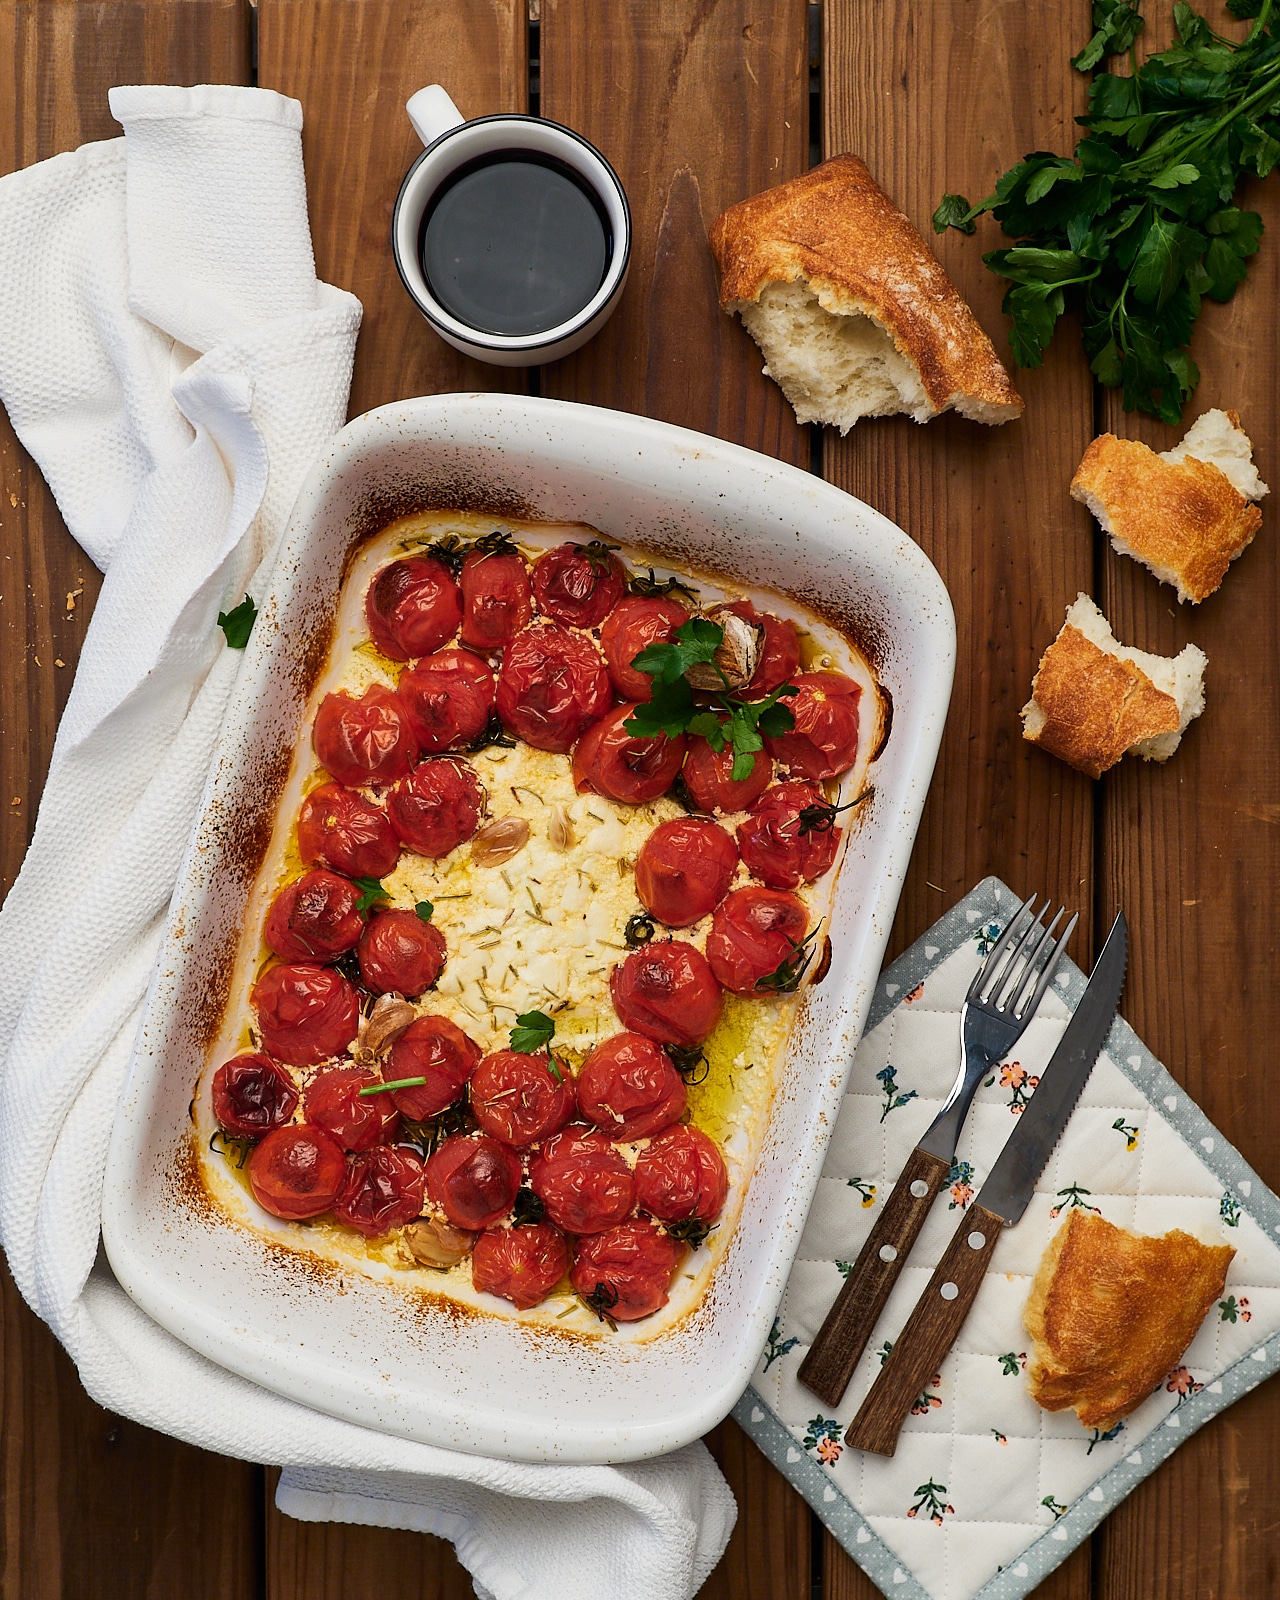 Mediterranean Baked Feta Cheese With Tomatoes - Bouyourdi - Delice Recipes